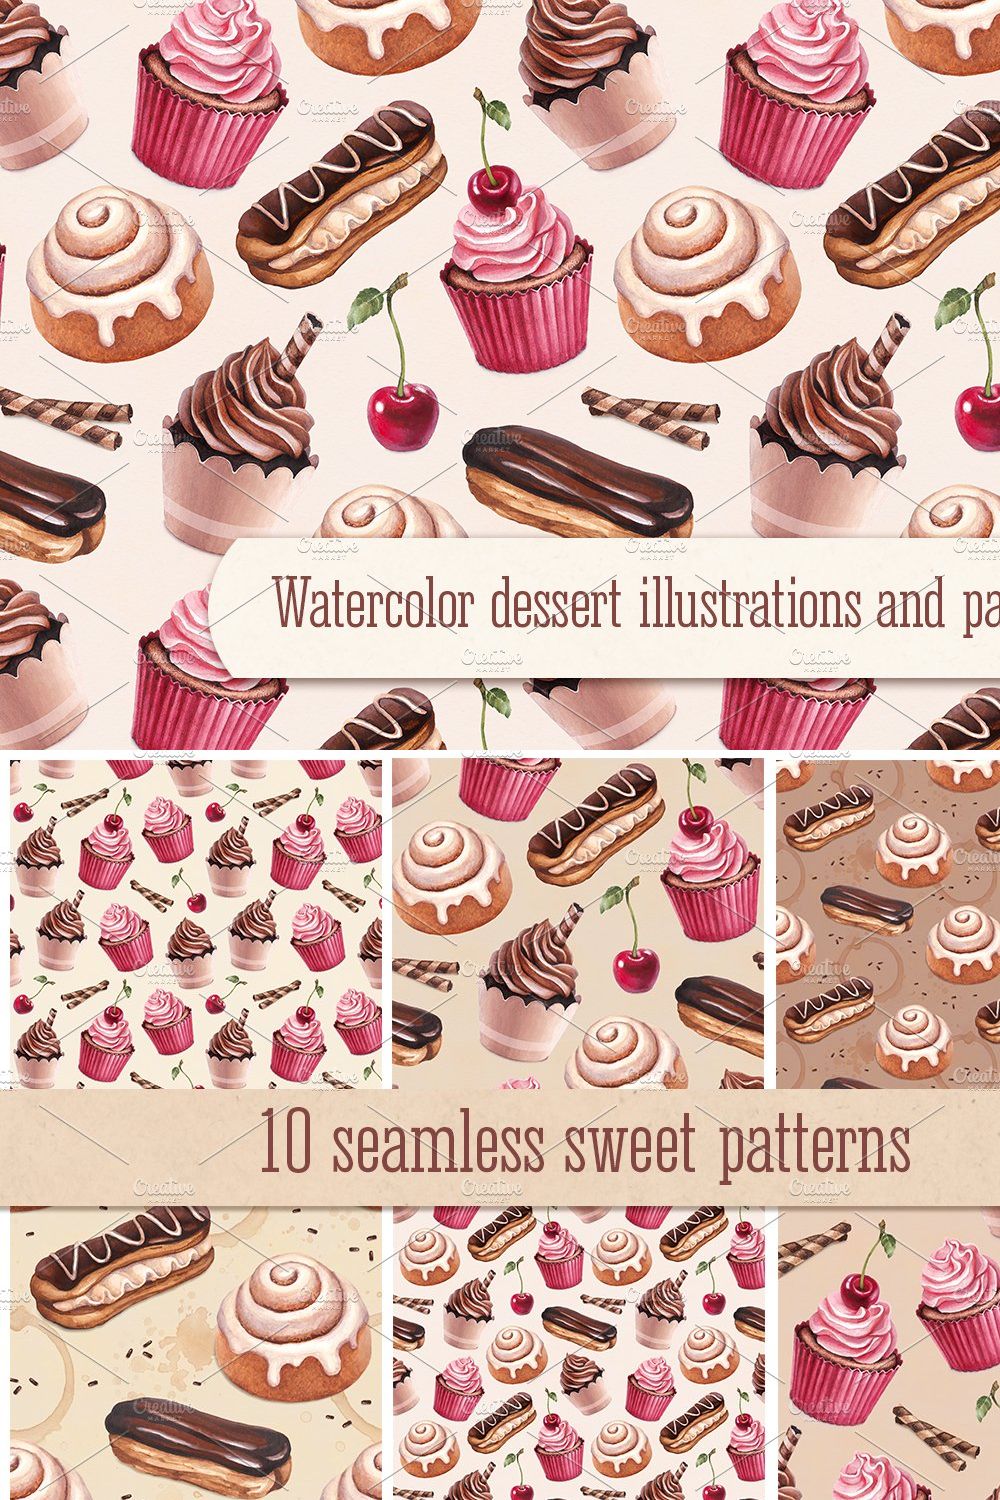 Dessert illustrations and patterns pinterest preview image.